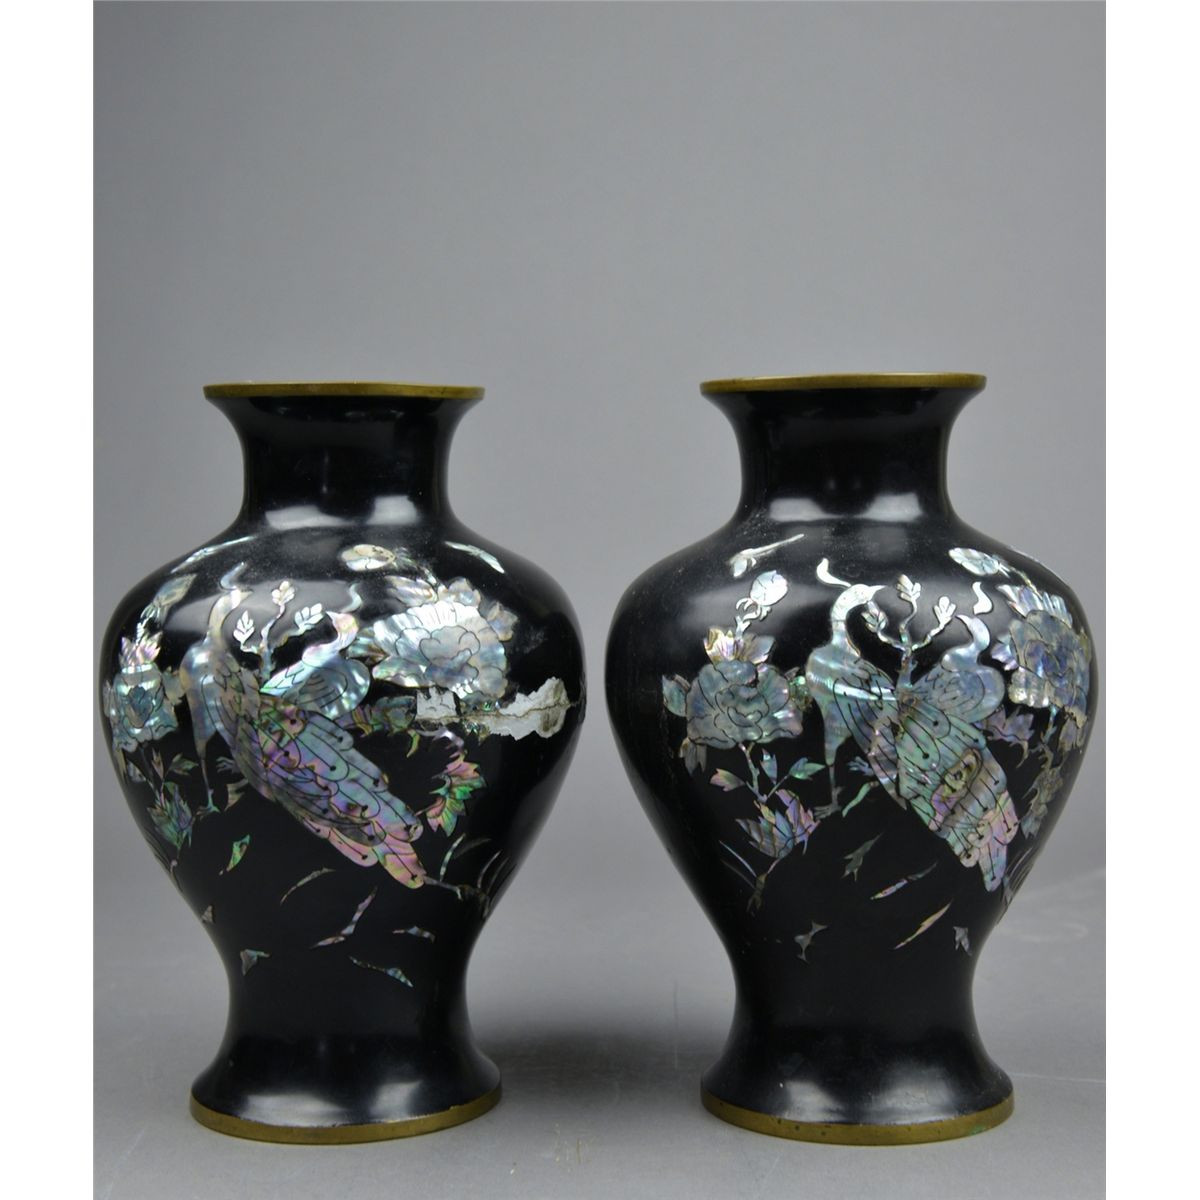 23 Stunning Korean Vases for Sale 2024 free download korean vases for sale of list of synonyms and antonyms of the word mother of pearl vases throughout pc2634 mother of pearl decor vase